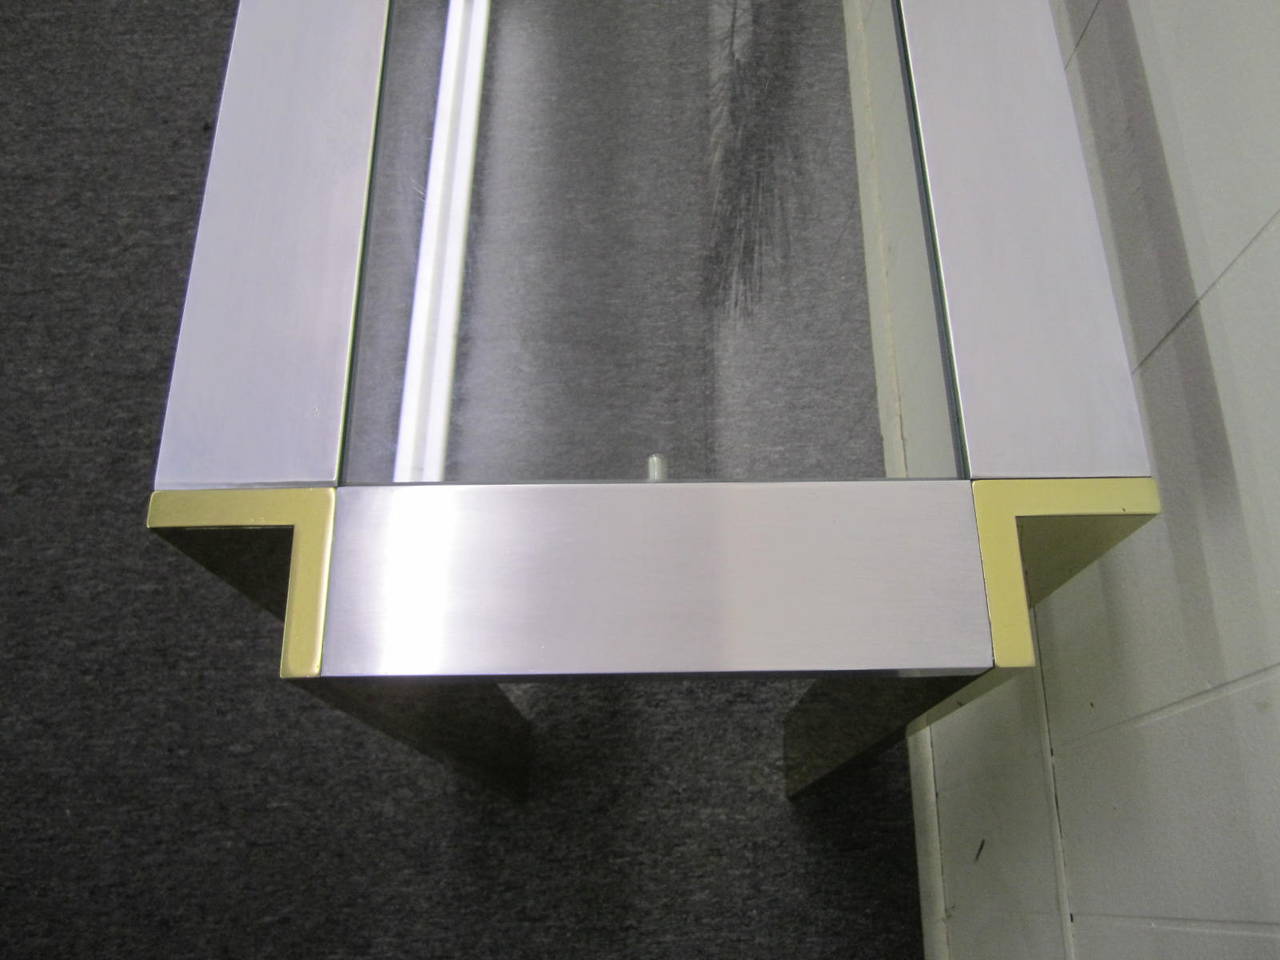 Great looking brushed aluminum and brass Romeo Rega console table. We love the use of the aluminum and the brass together very unusual. The table shows only light wear with a few light scuffs and dings-nothing serious or distracting.